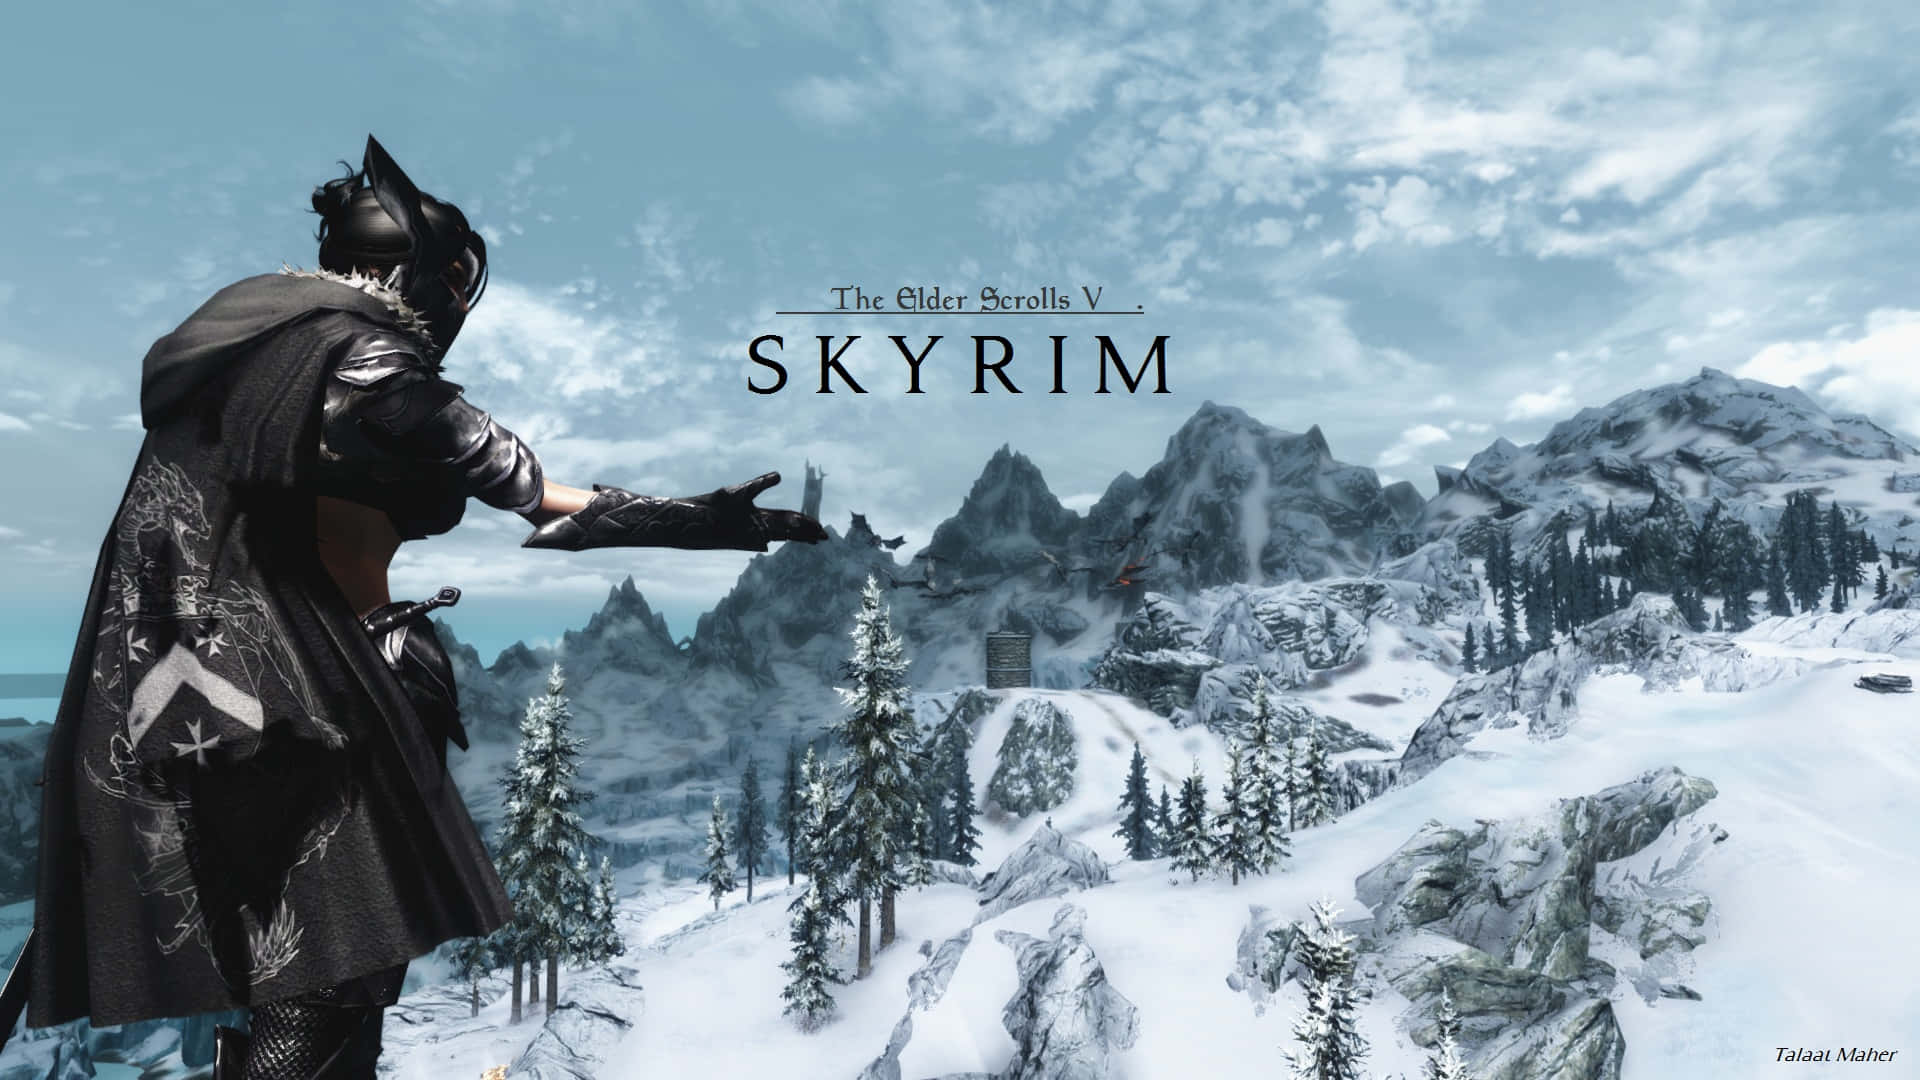 Dovahkiin Hero In Action Amidst A Scenic Skyrim Landscape. Background